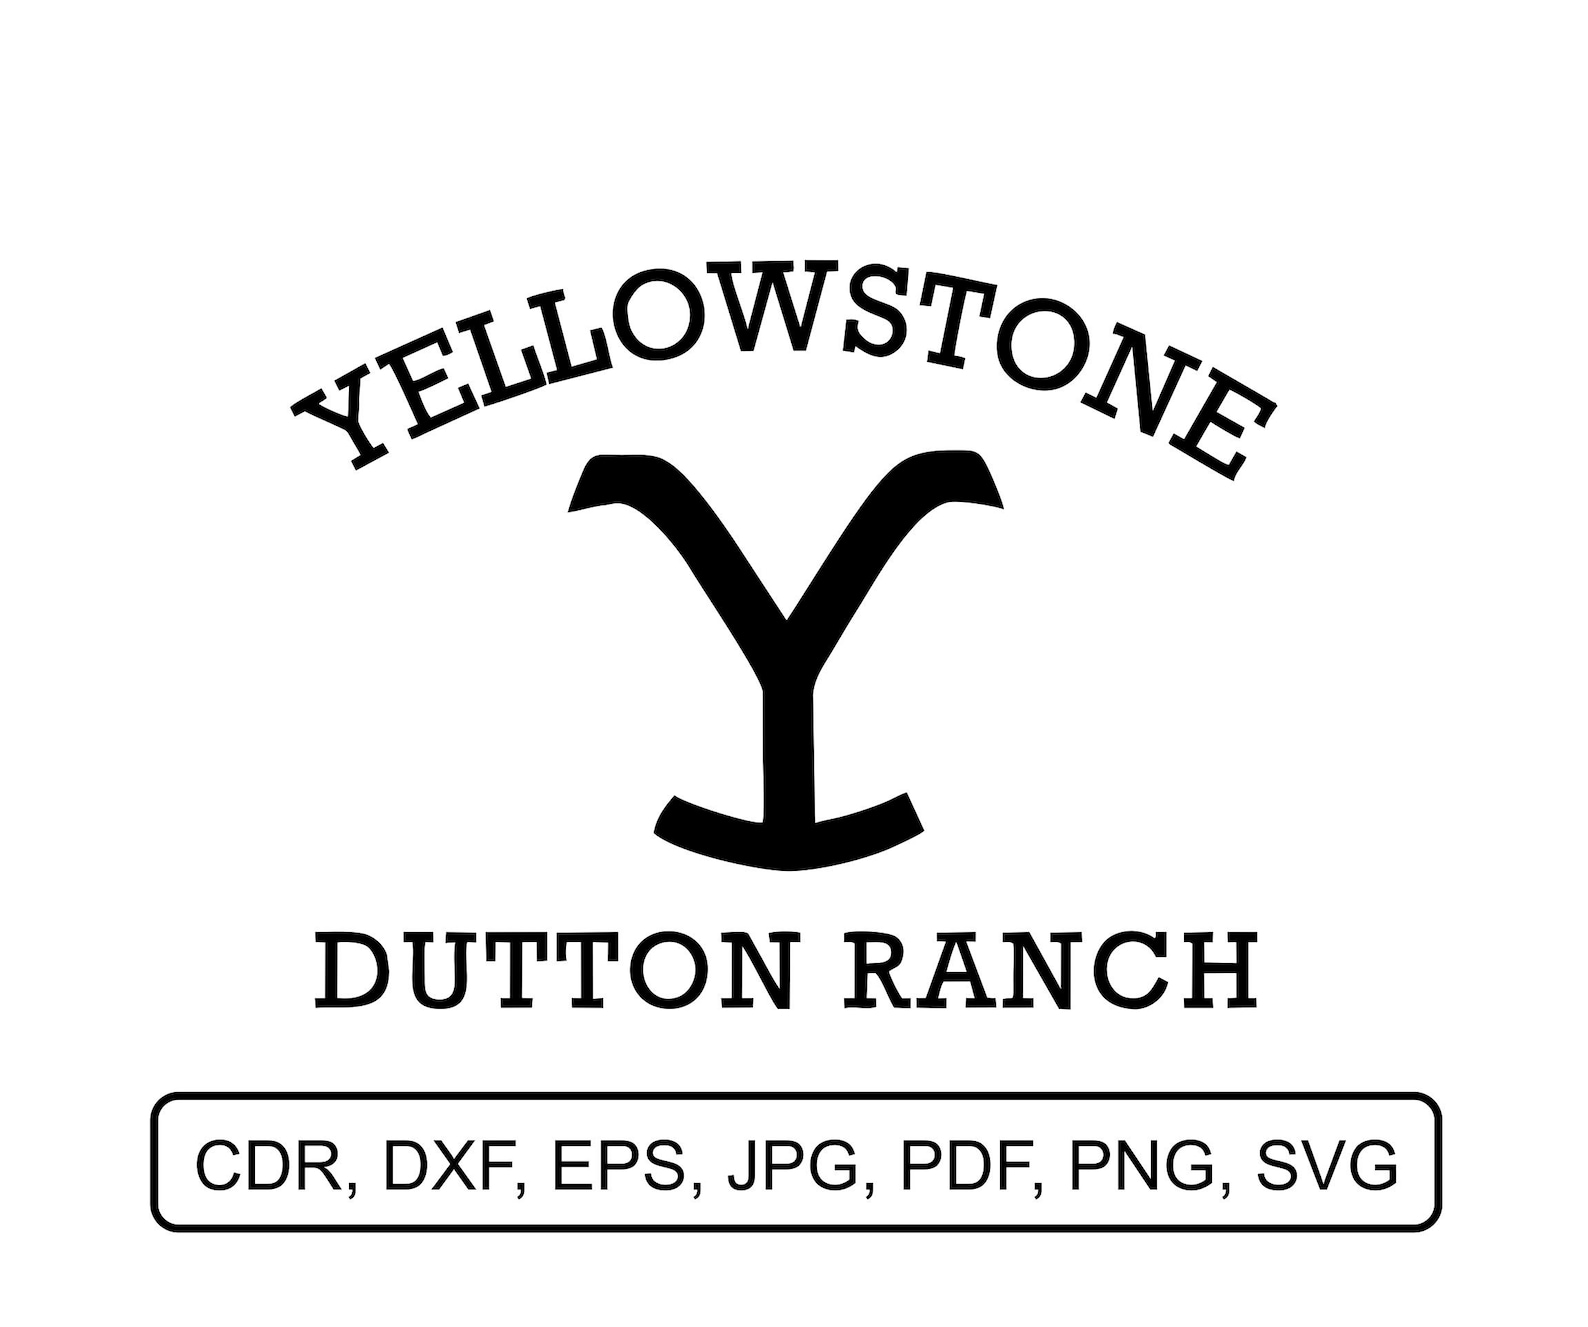 Yellowstone Dutton Ranch Vector Cut File .svg .dxf .eps image 0.